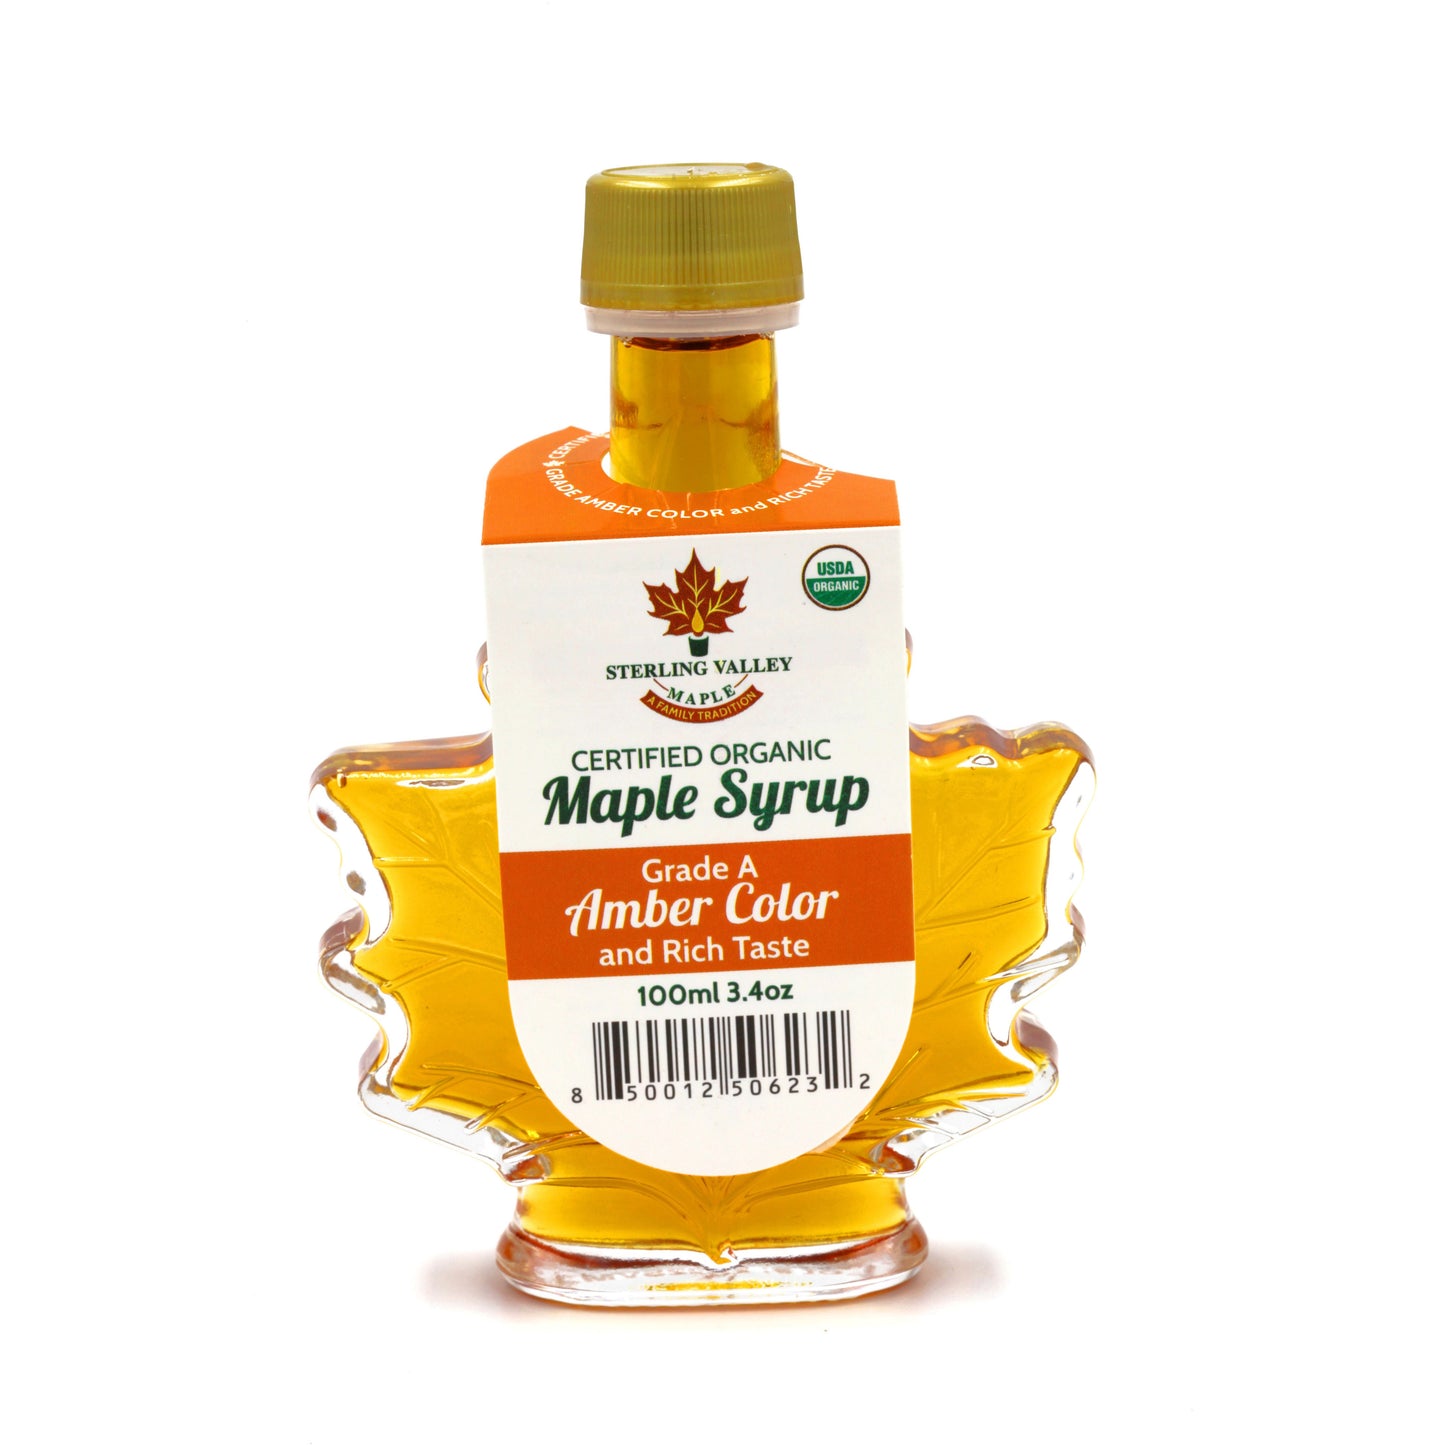 Sterling Valley Maple Syrup "Organic" Maple Leaf Shaped Bottle - Eastern Shore Products